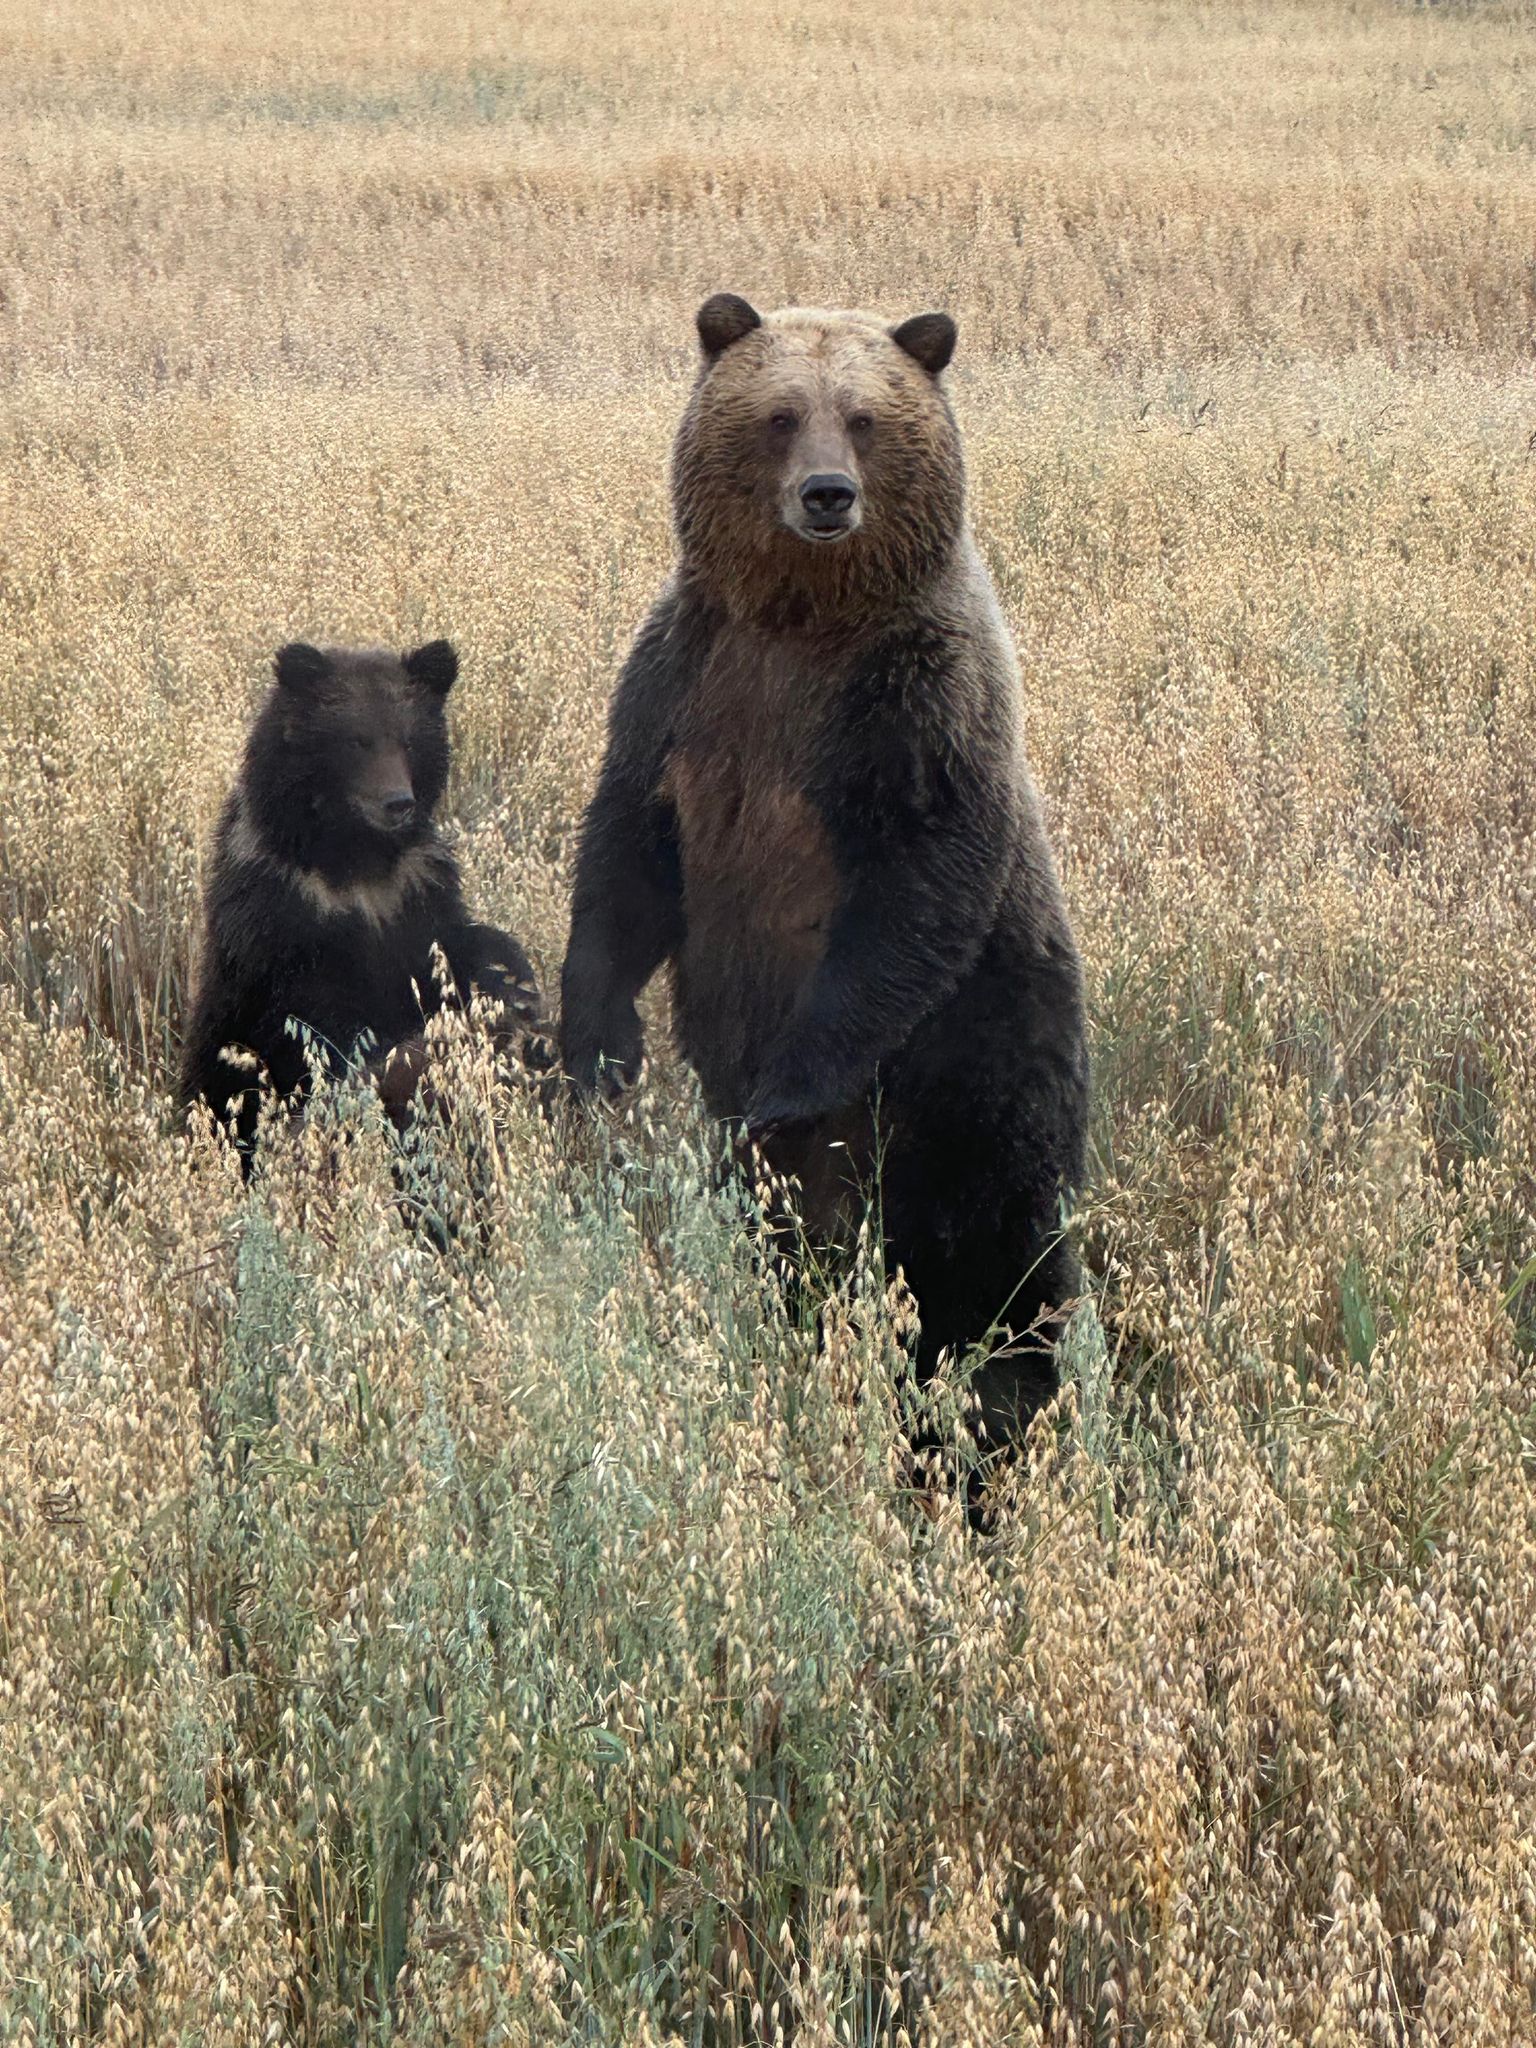 Hibernation: What's Going on for Grizzly Bears in Winter